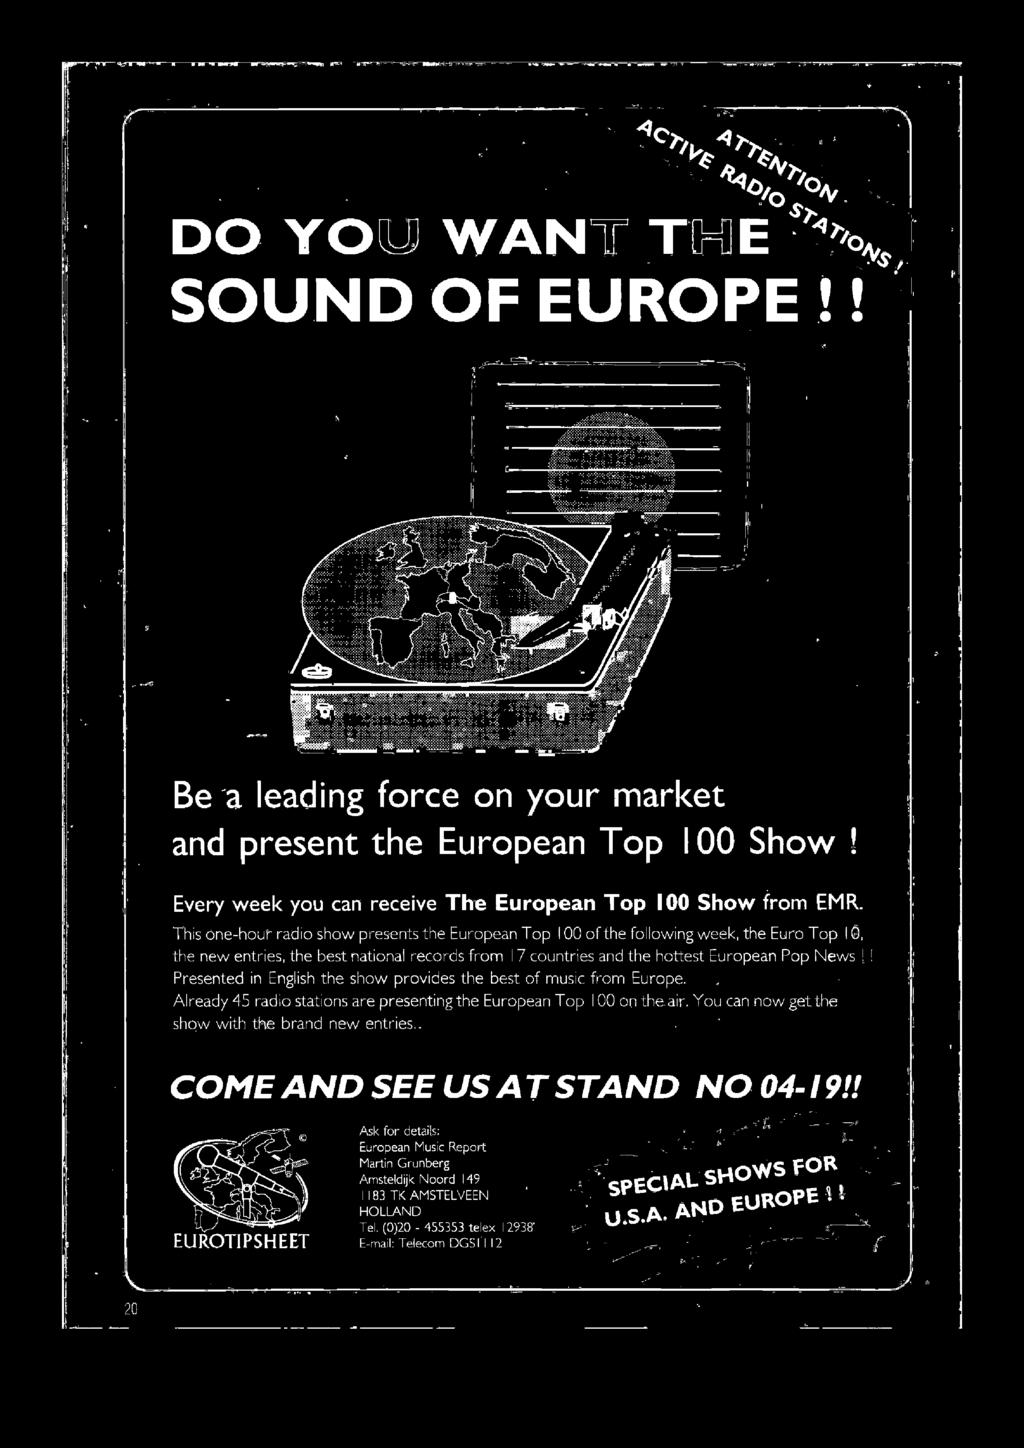 Presented in English the show provides the best of music from Europe.